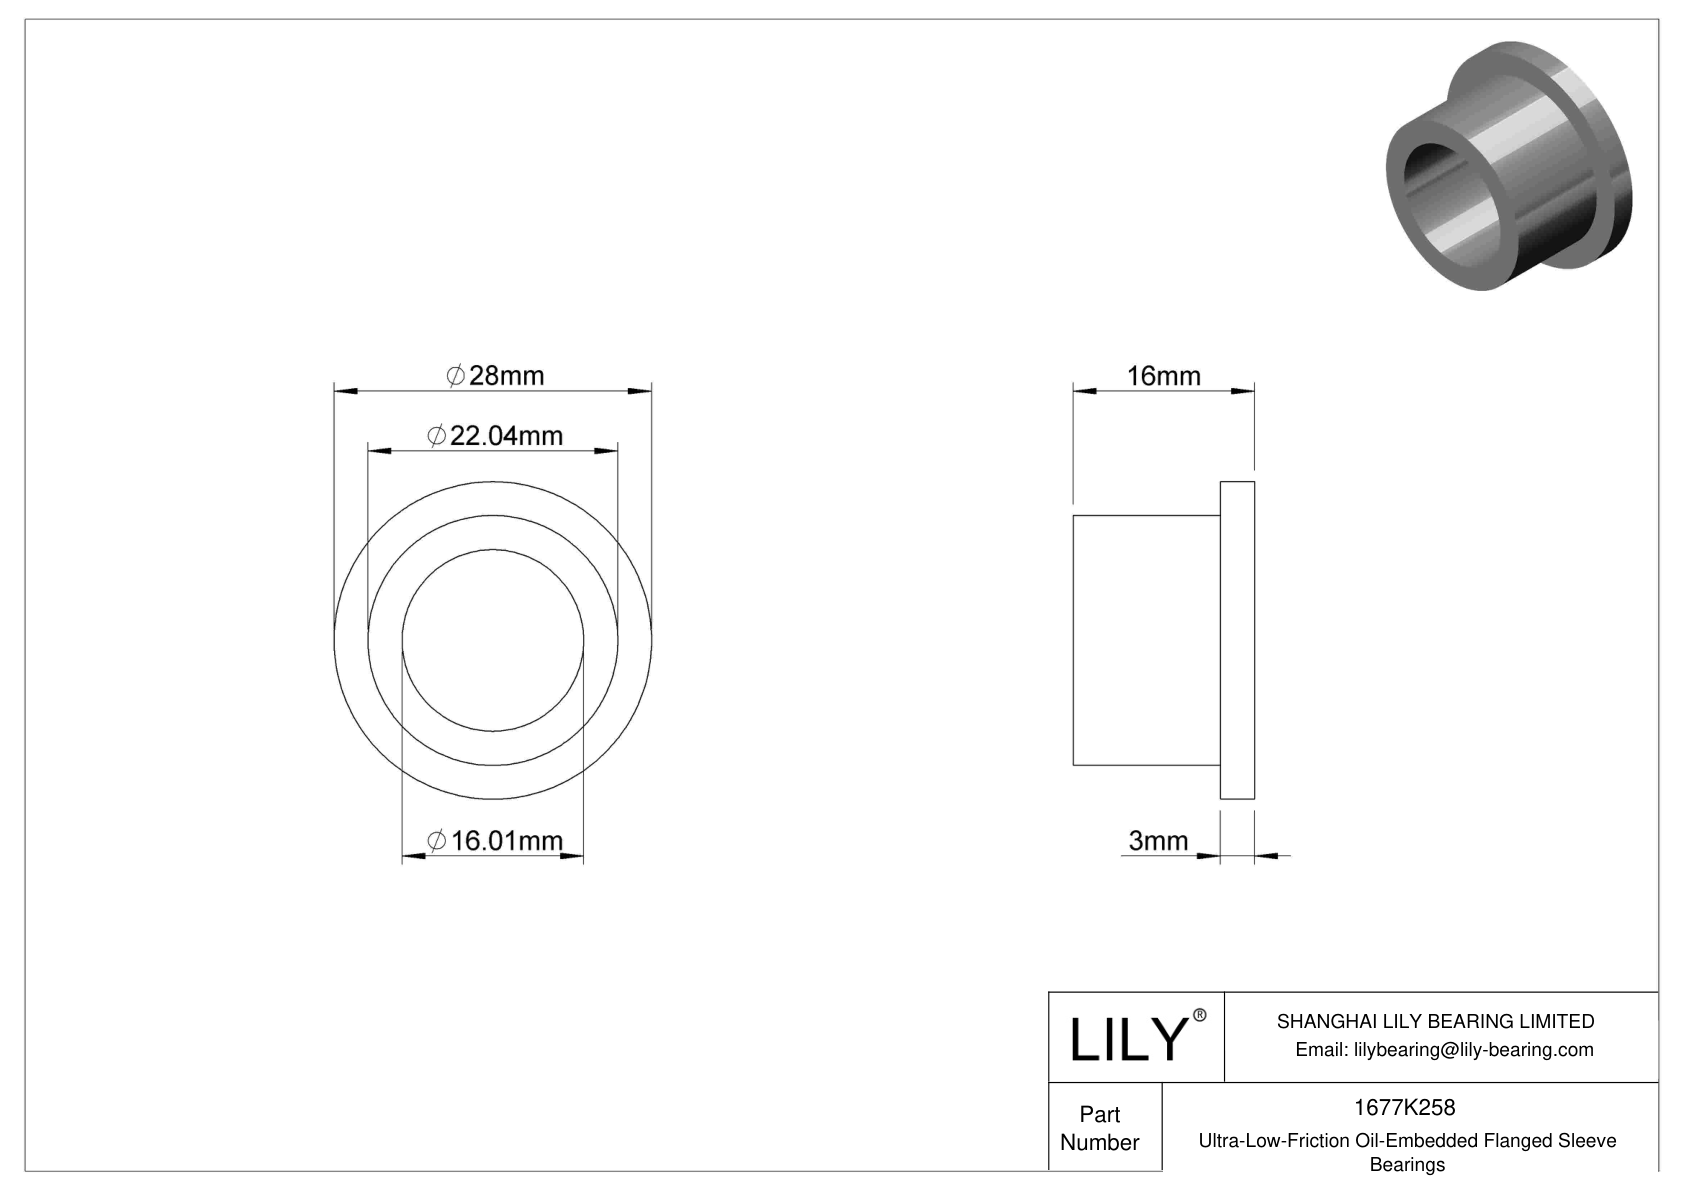 BGHHKCFI Ultra-Low-Friction Oil-Embedded Flanged Sleeve Bearings cad drawing